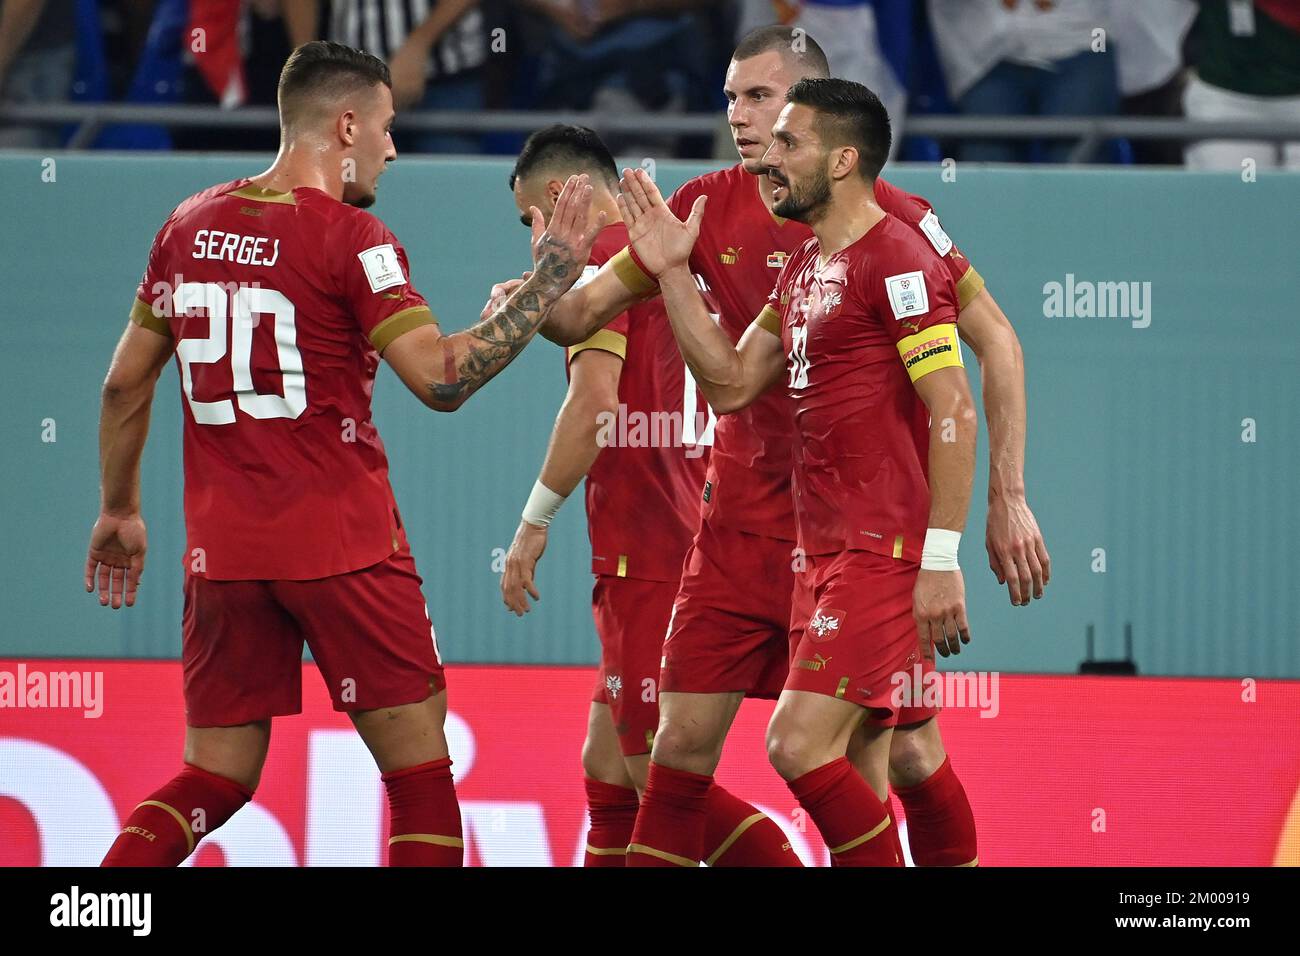 Doha, Katar. 02nd Dec, 2022. goaljubel around MITROVIC Aleksandar (SRB, re) after goal to 1-1, jubilation, joy, enthusiasm, action with MBEUMO Bryan (SRB). Serbia (SRB) - Switzerland (SUI) 2-3 Group stage Group G, Game 47 on 02.12.2022, Stadium 974, Football World Cup 2022 in Qatar from 20.11. - 18.12.2022 ? Credit: dpa/Alamy Live News Stock Photo